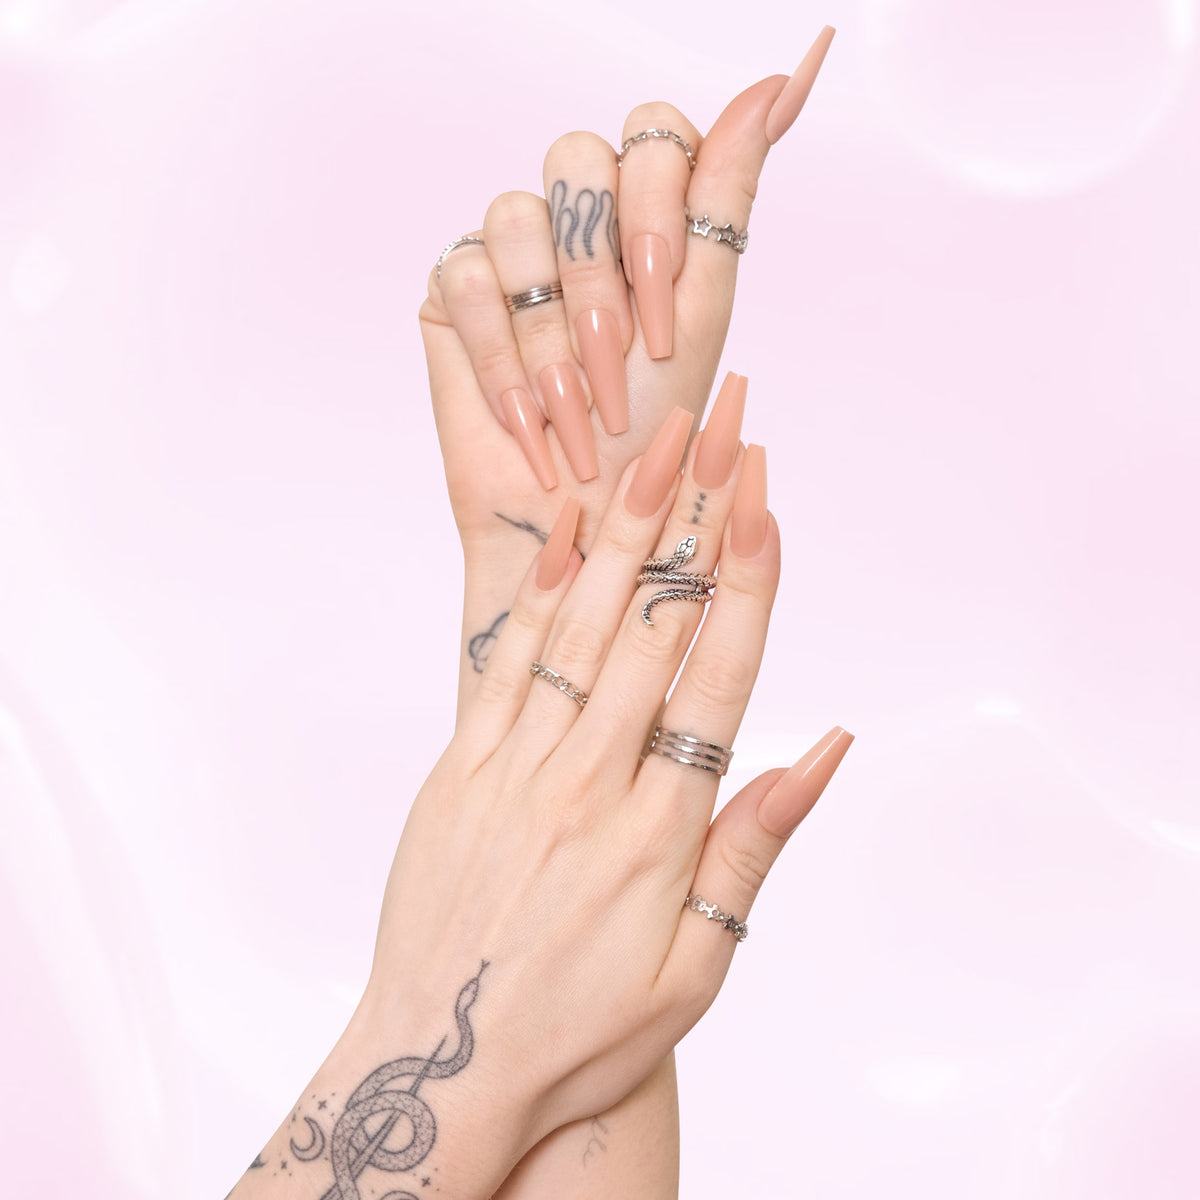 Two hands wearing universally flattering acrylic nude press-on nails.